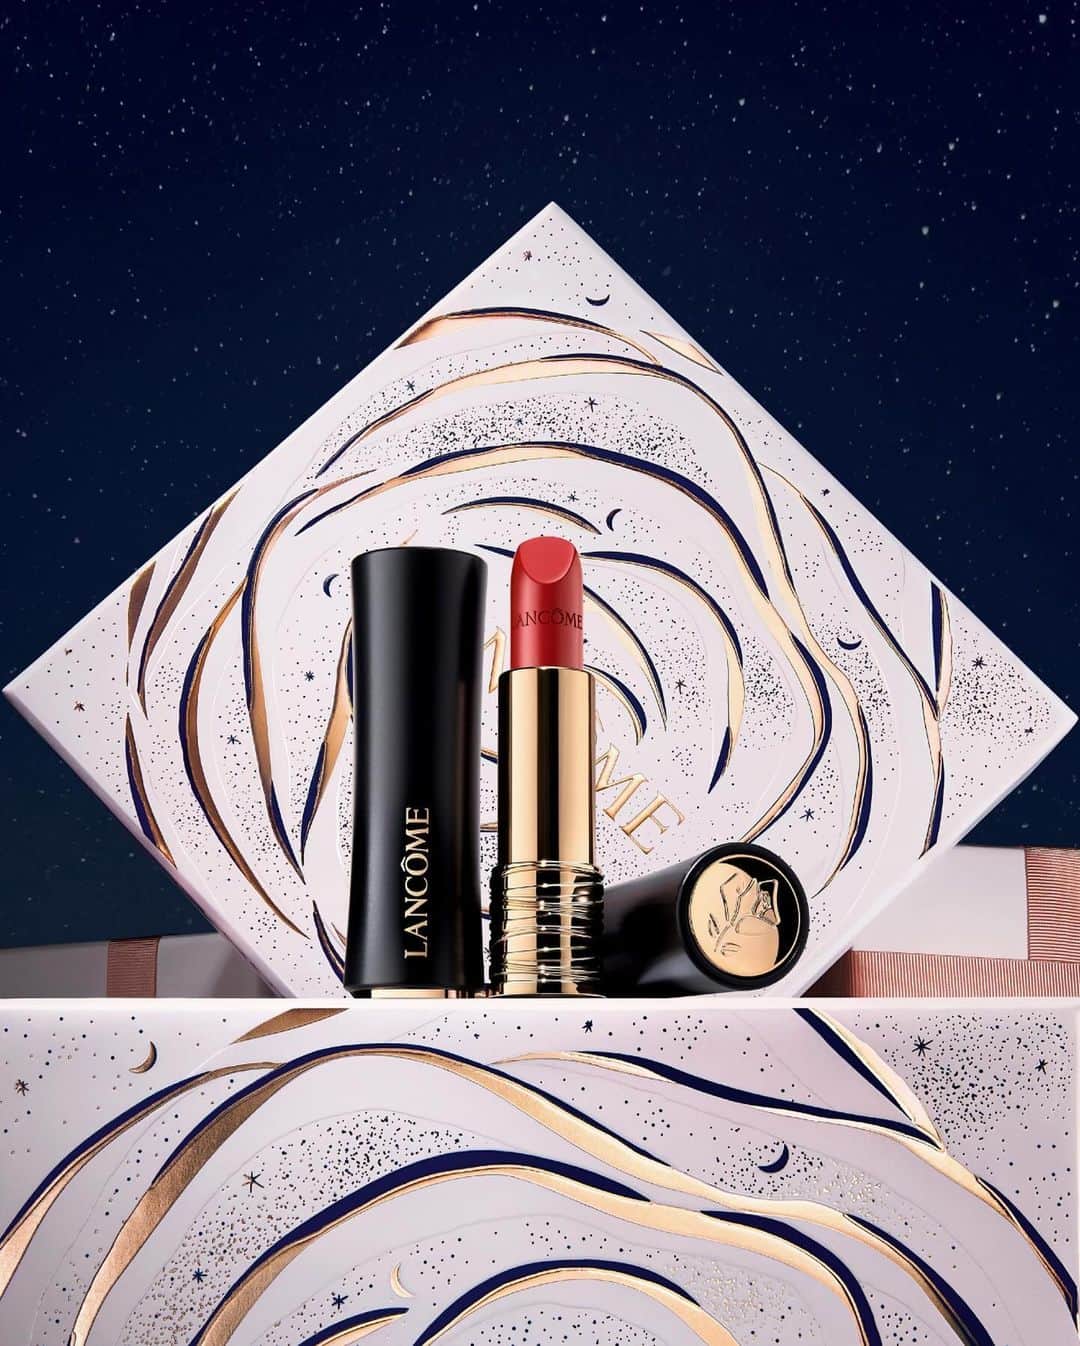 Lancôme Officialのインスタグラム：「Sublimate your natural radiance with Lancôme’s makeup essentials: Teint Idole Ultra Wear foundation, Hypnôse mascara and L’Absolu Rouge Cream in a beautiful red shade.  #Lancome #LancomexLouvre #Holiday23」